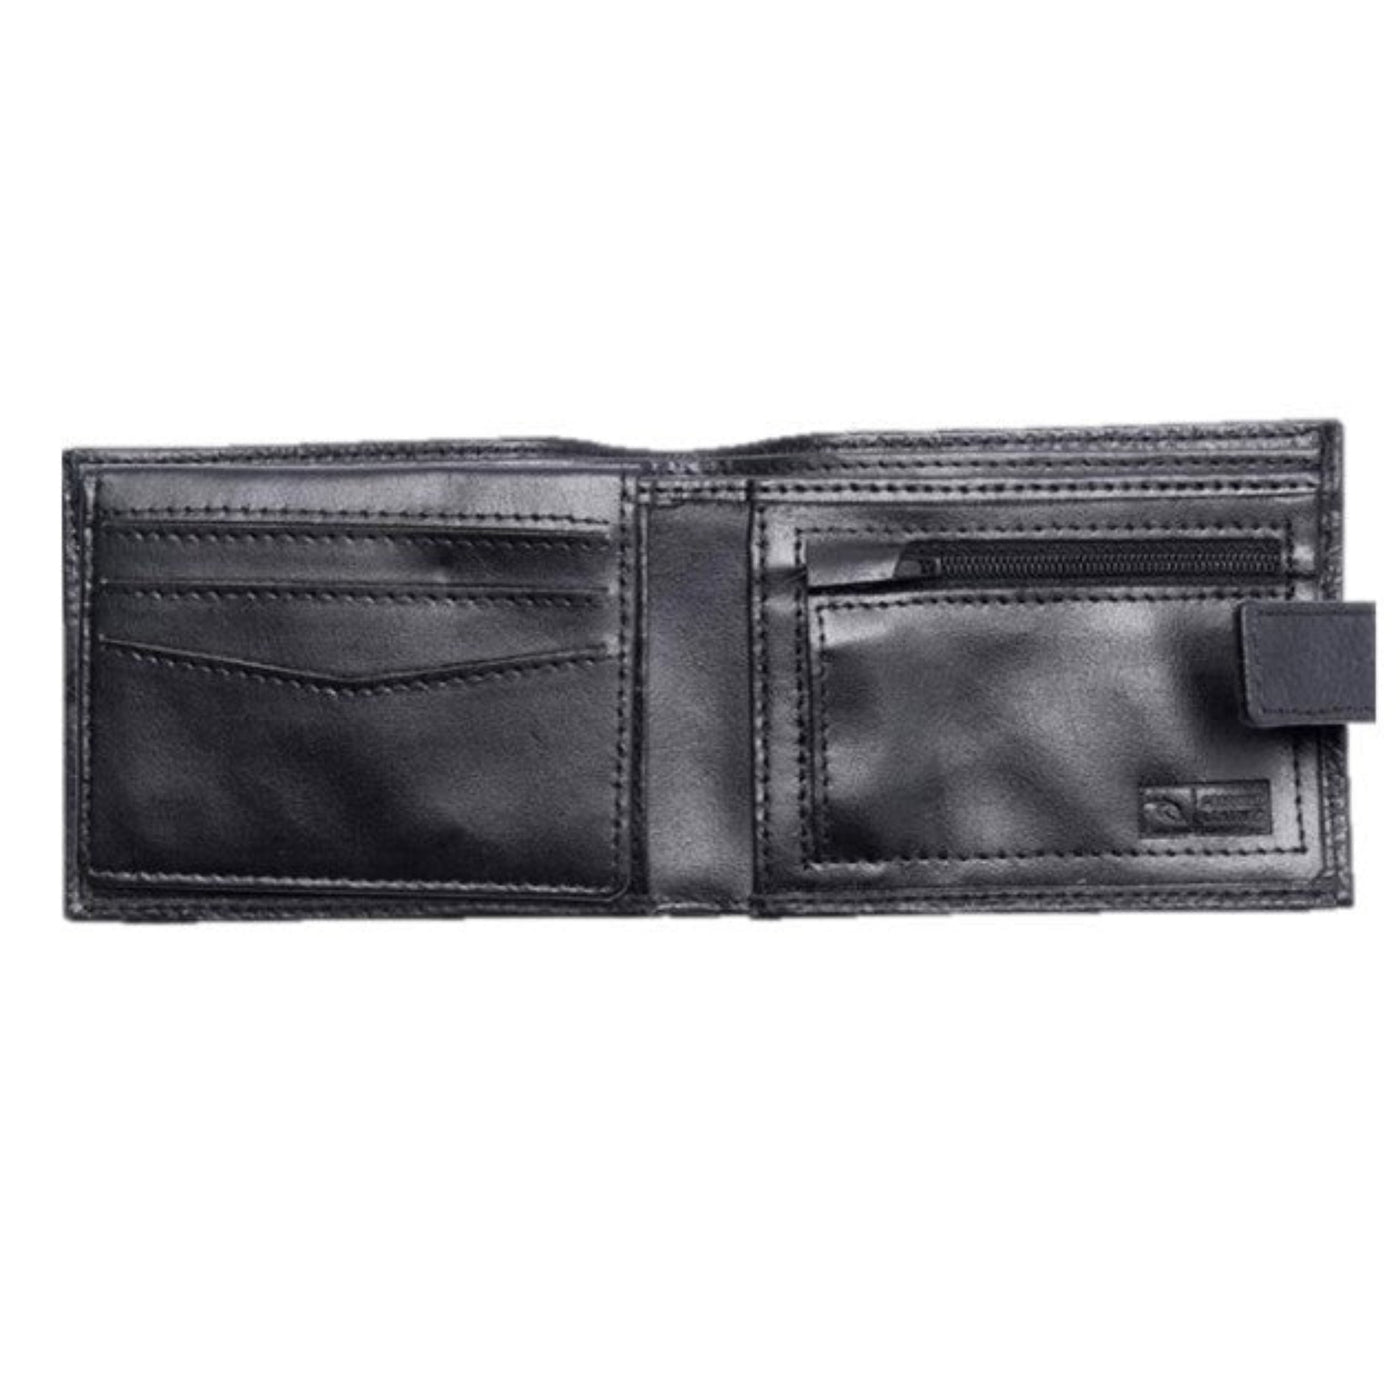 Rip Curl Flux Clip RFID All Day Wallet